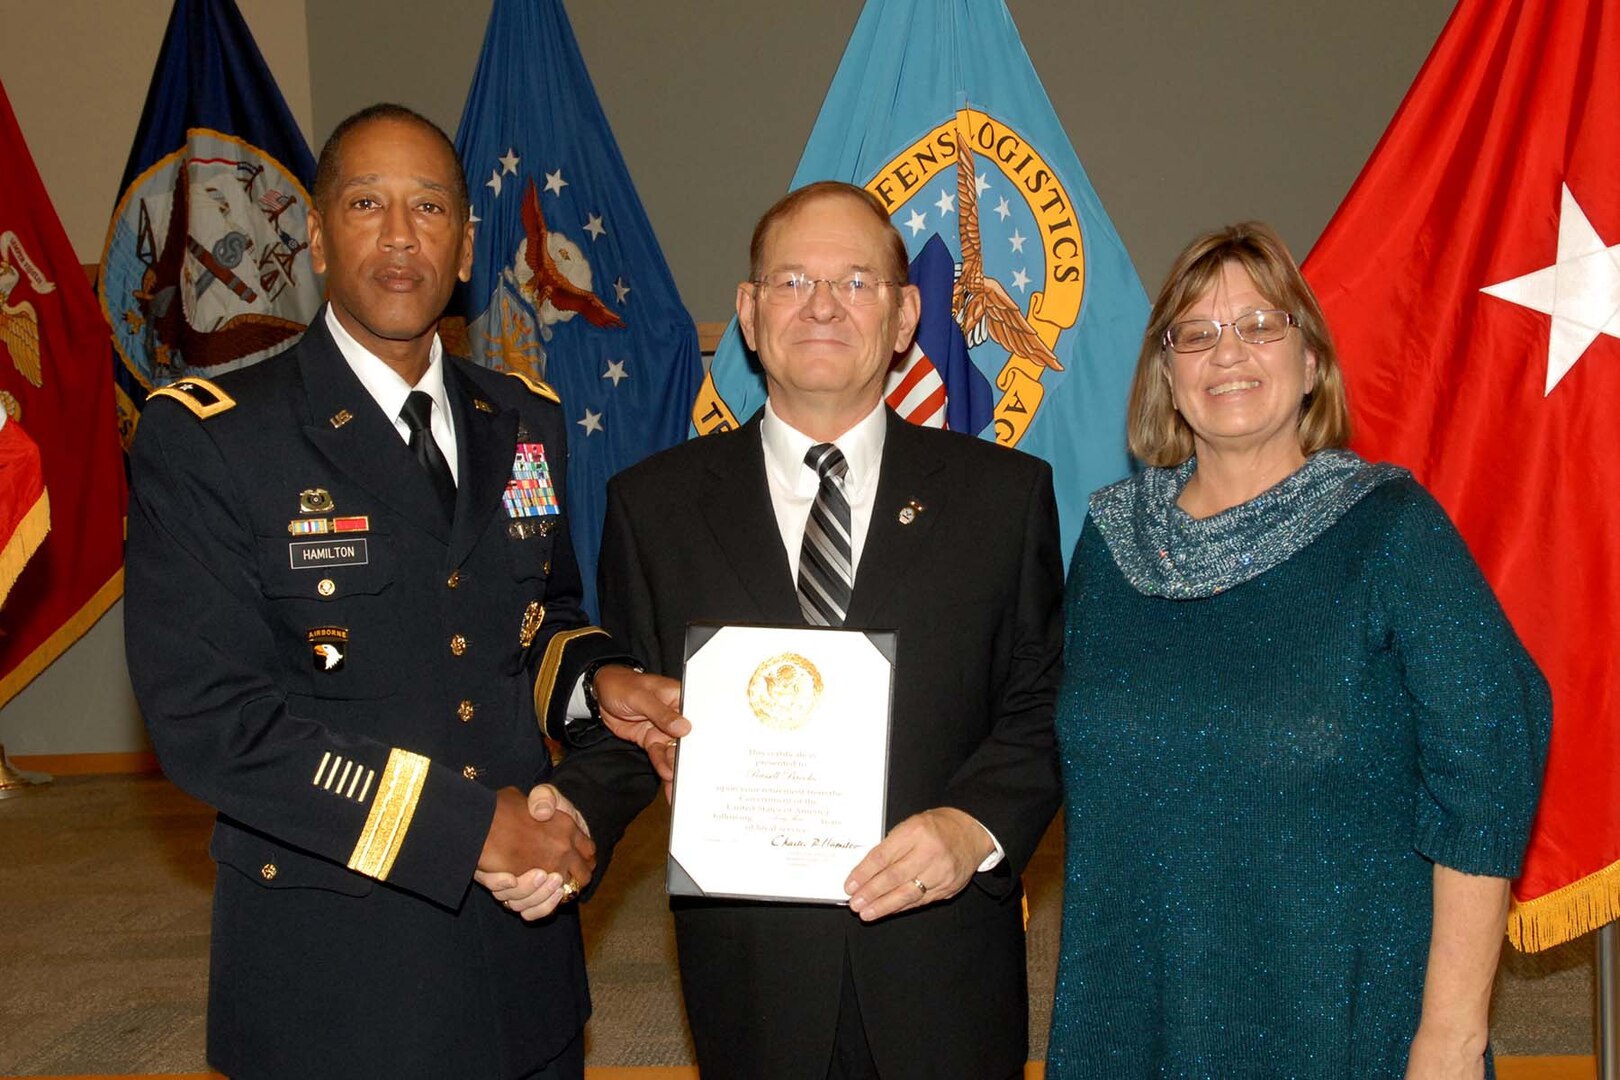 Army Brig. Gen. Charles Hamilton, DLA Troop Support commander, presents Russ Brooks, Subsistence field representative, with a certificate of retirement during a ceremony Dec. 15. Brooks was accompanied by his wife Denise, whom he thanked for standing beside him during his career.